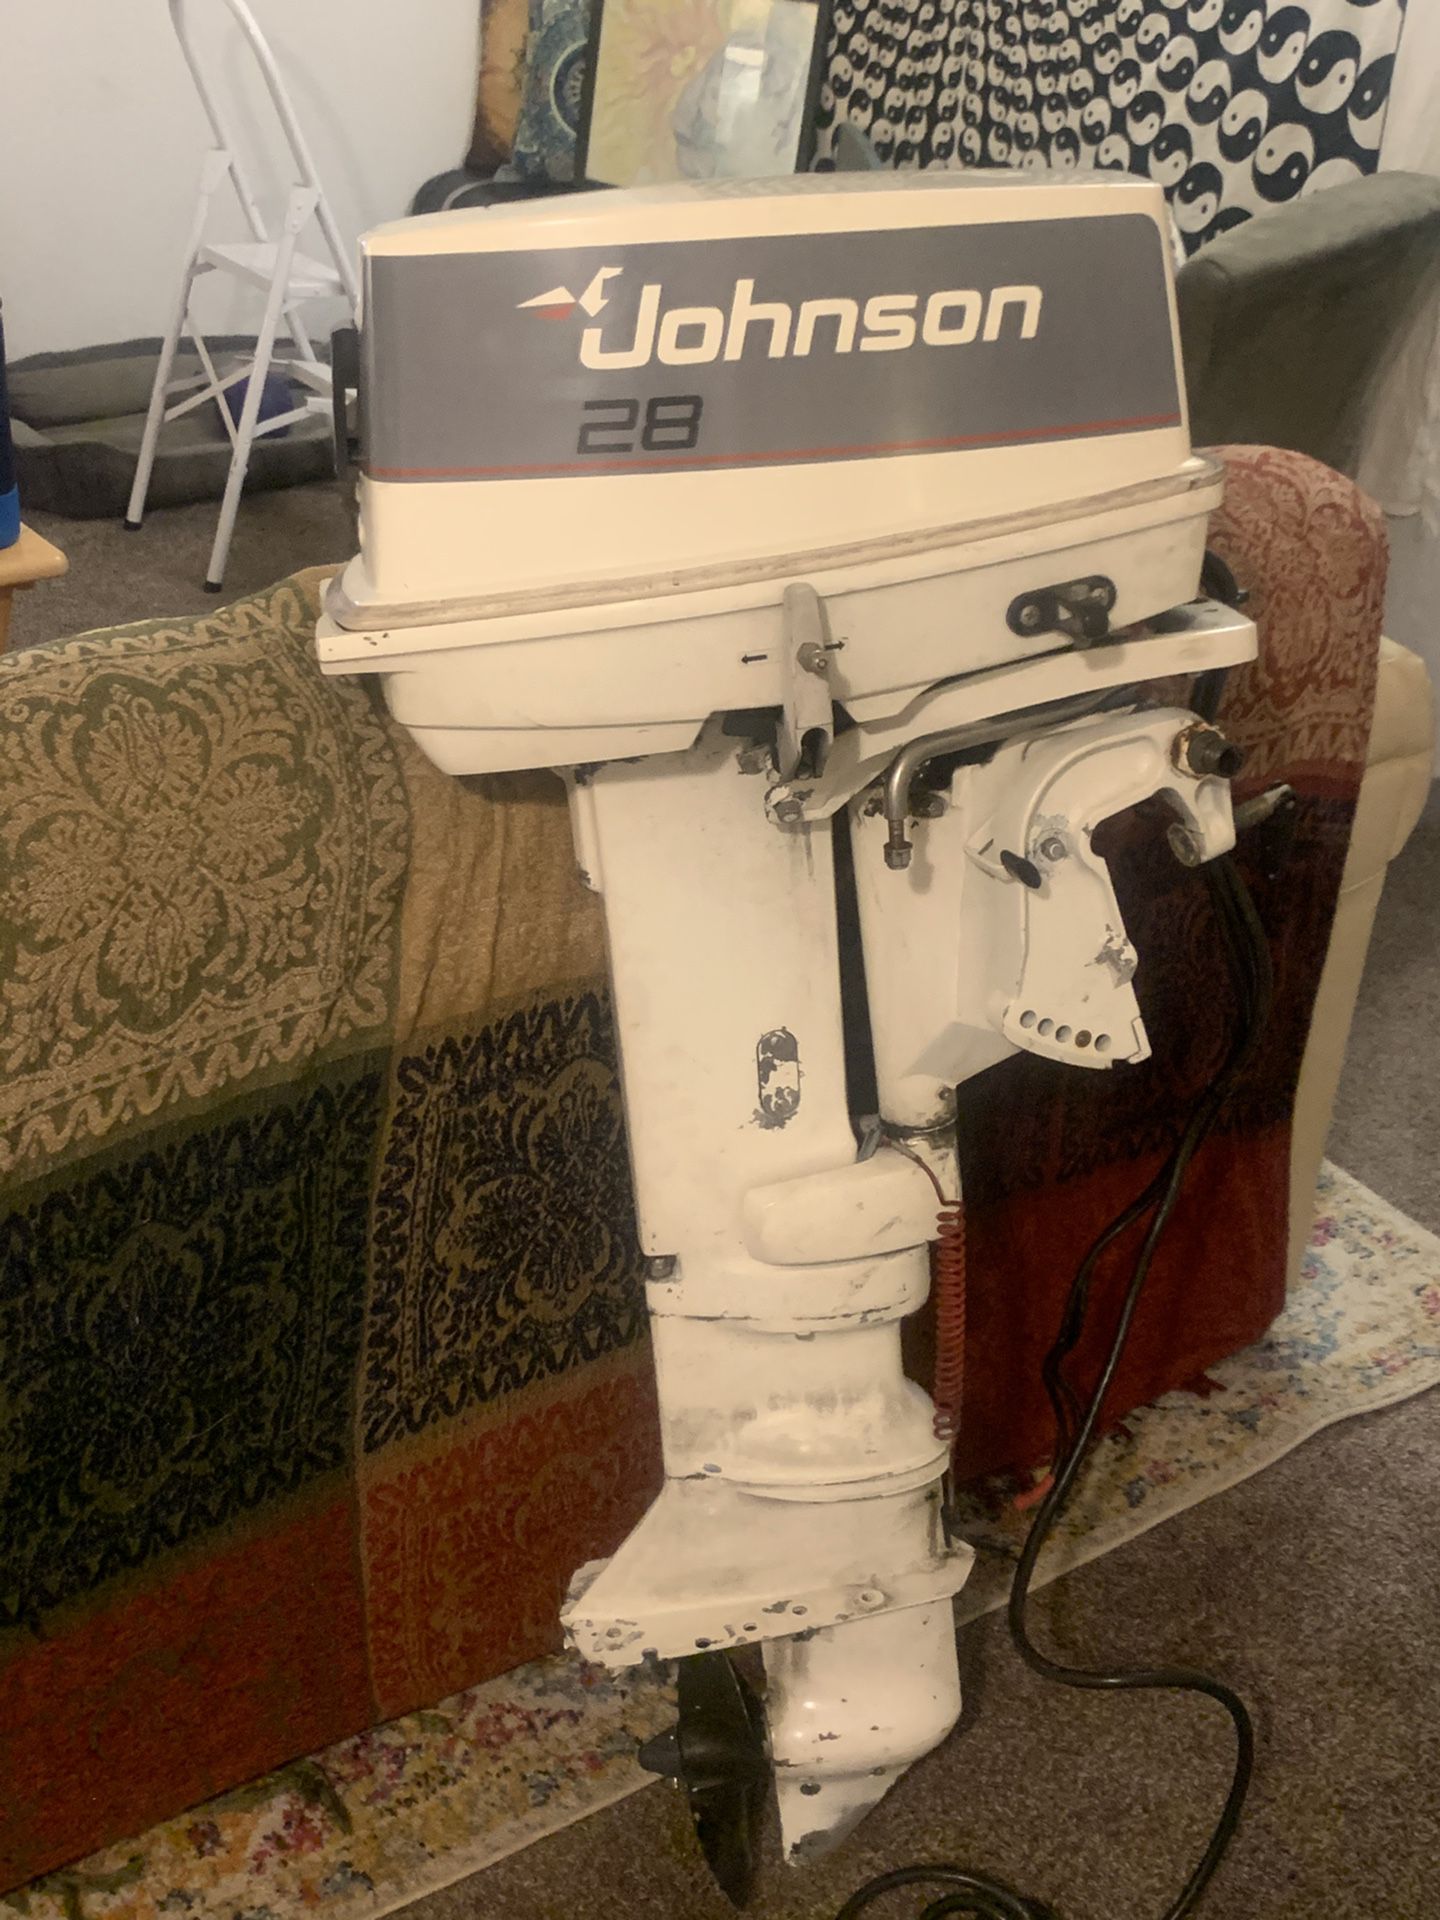 Johnson 28 SPL - outboard motor - Great condition